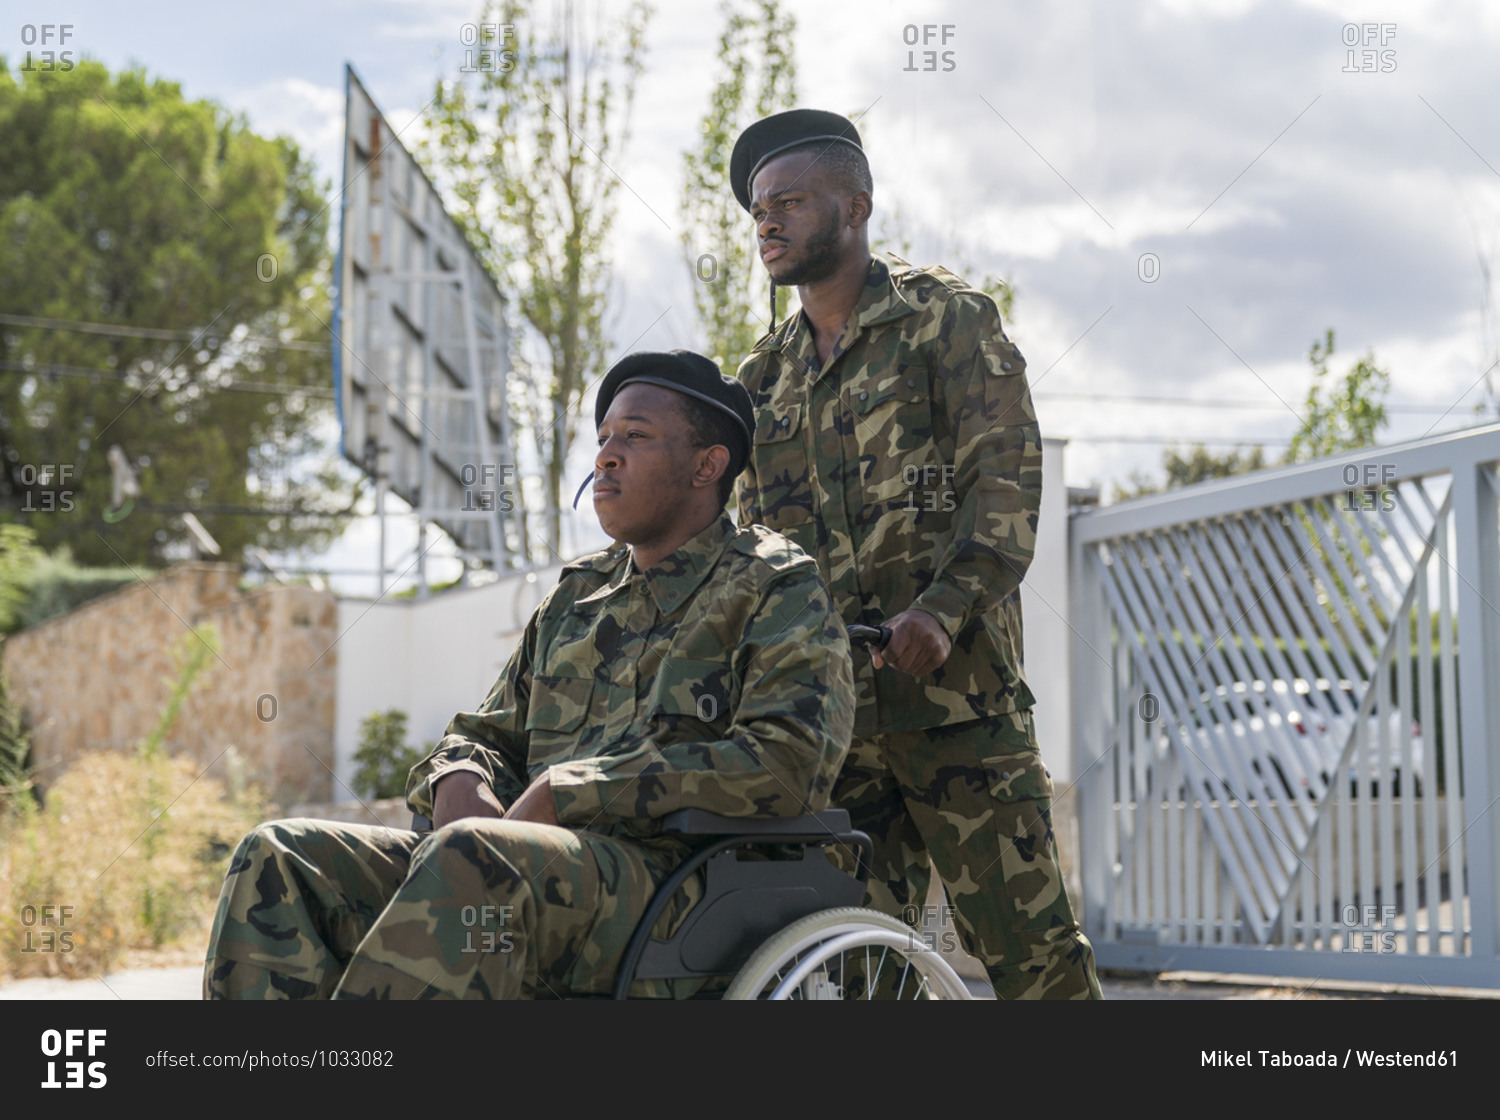 Serious army soldier helping another military officer sitting on wheelchair